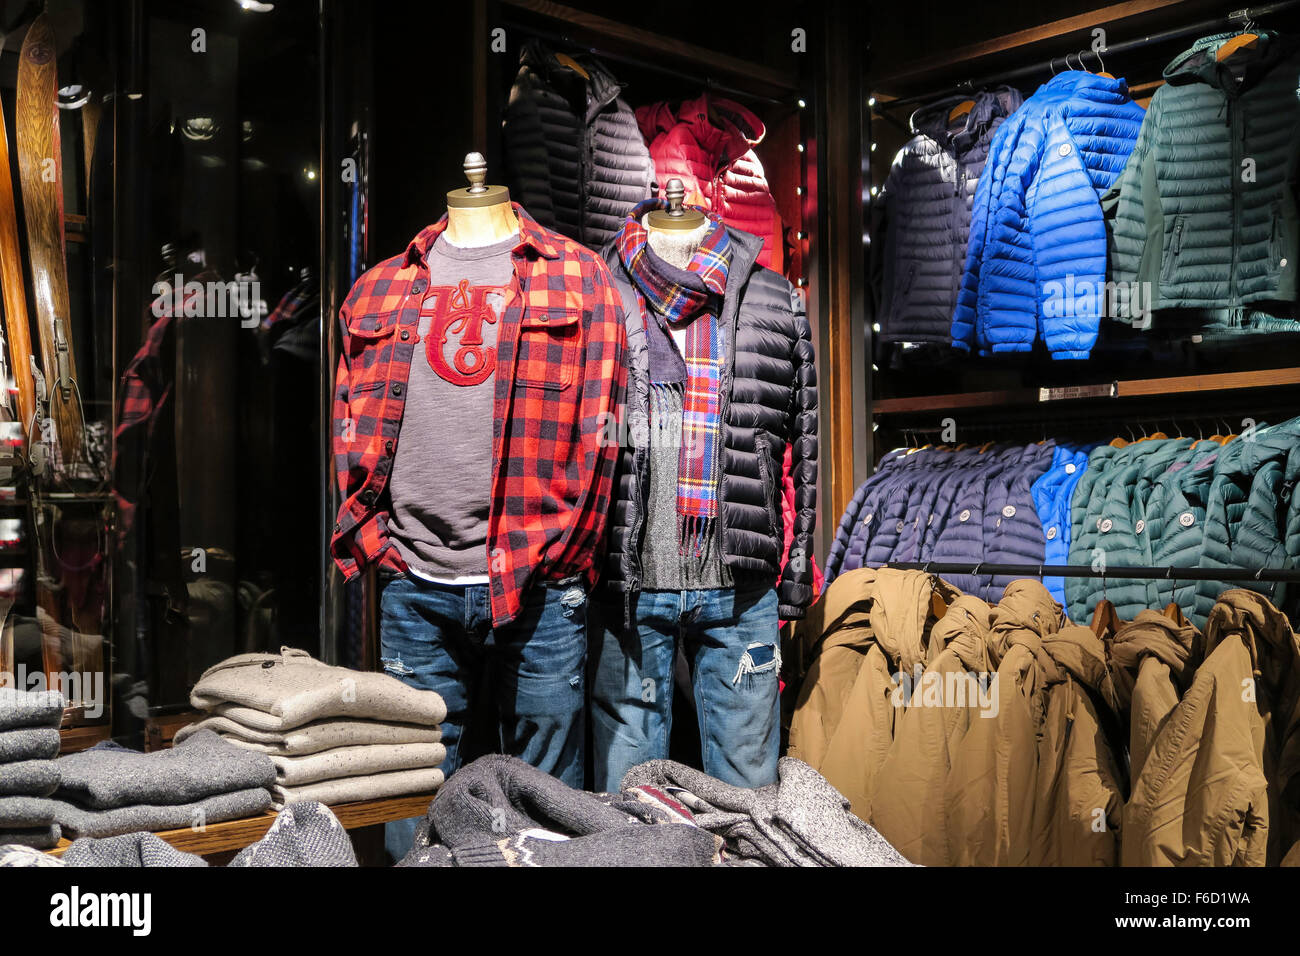 Abercrombie & Fitch Flagship Store Interior, Fifth Avenue, NYC Stock Photo  - Alamy